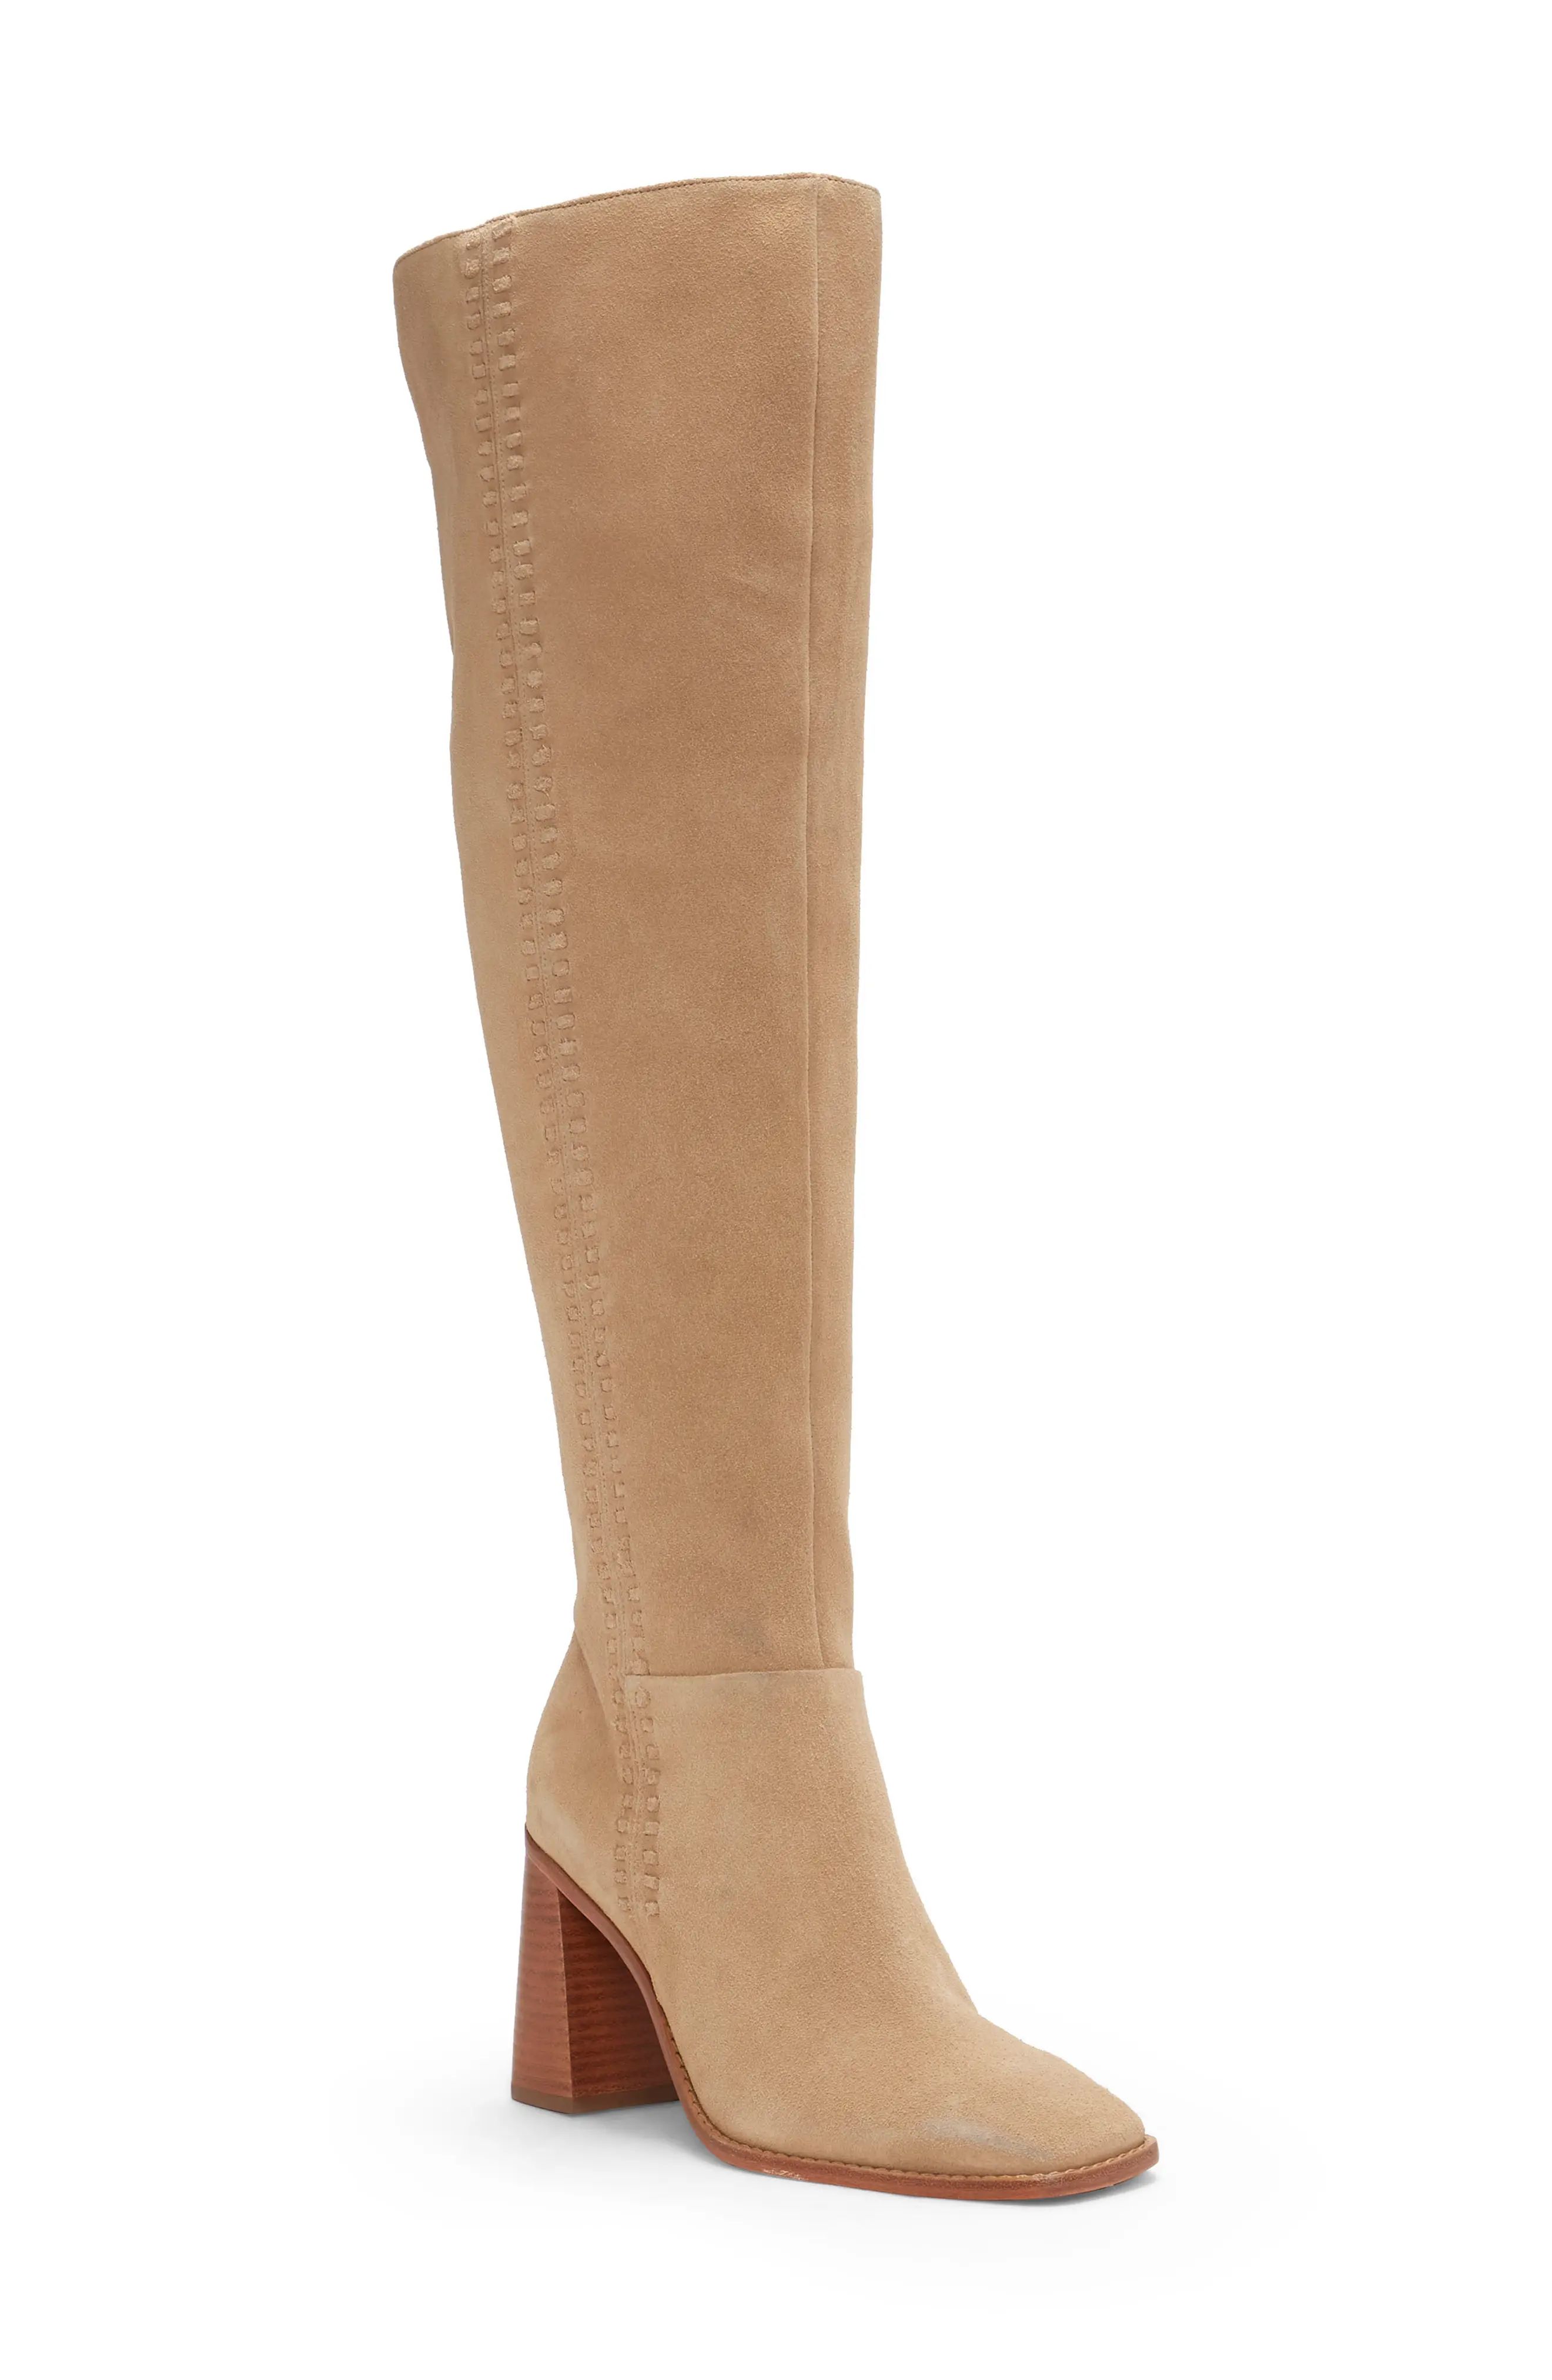 Vince Camuto Englea Over the Knee Boot, Size 5 in Tortilla at Nordstrom | Nordstrom